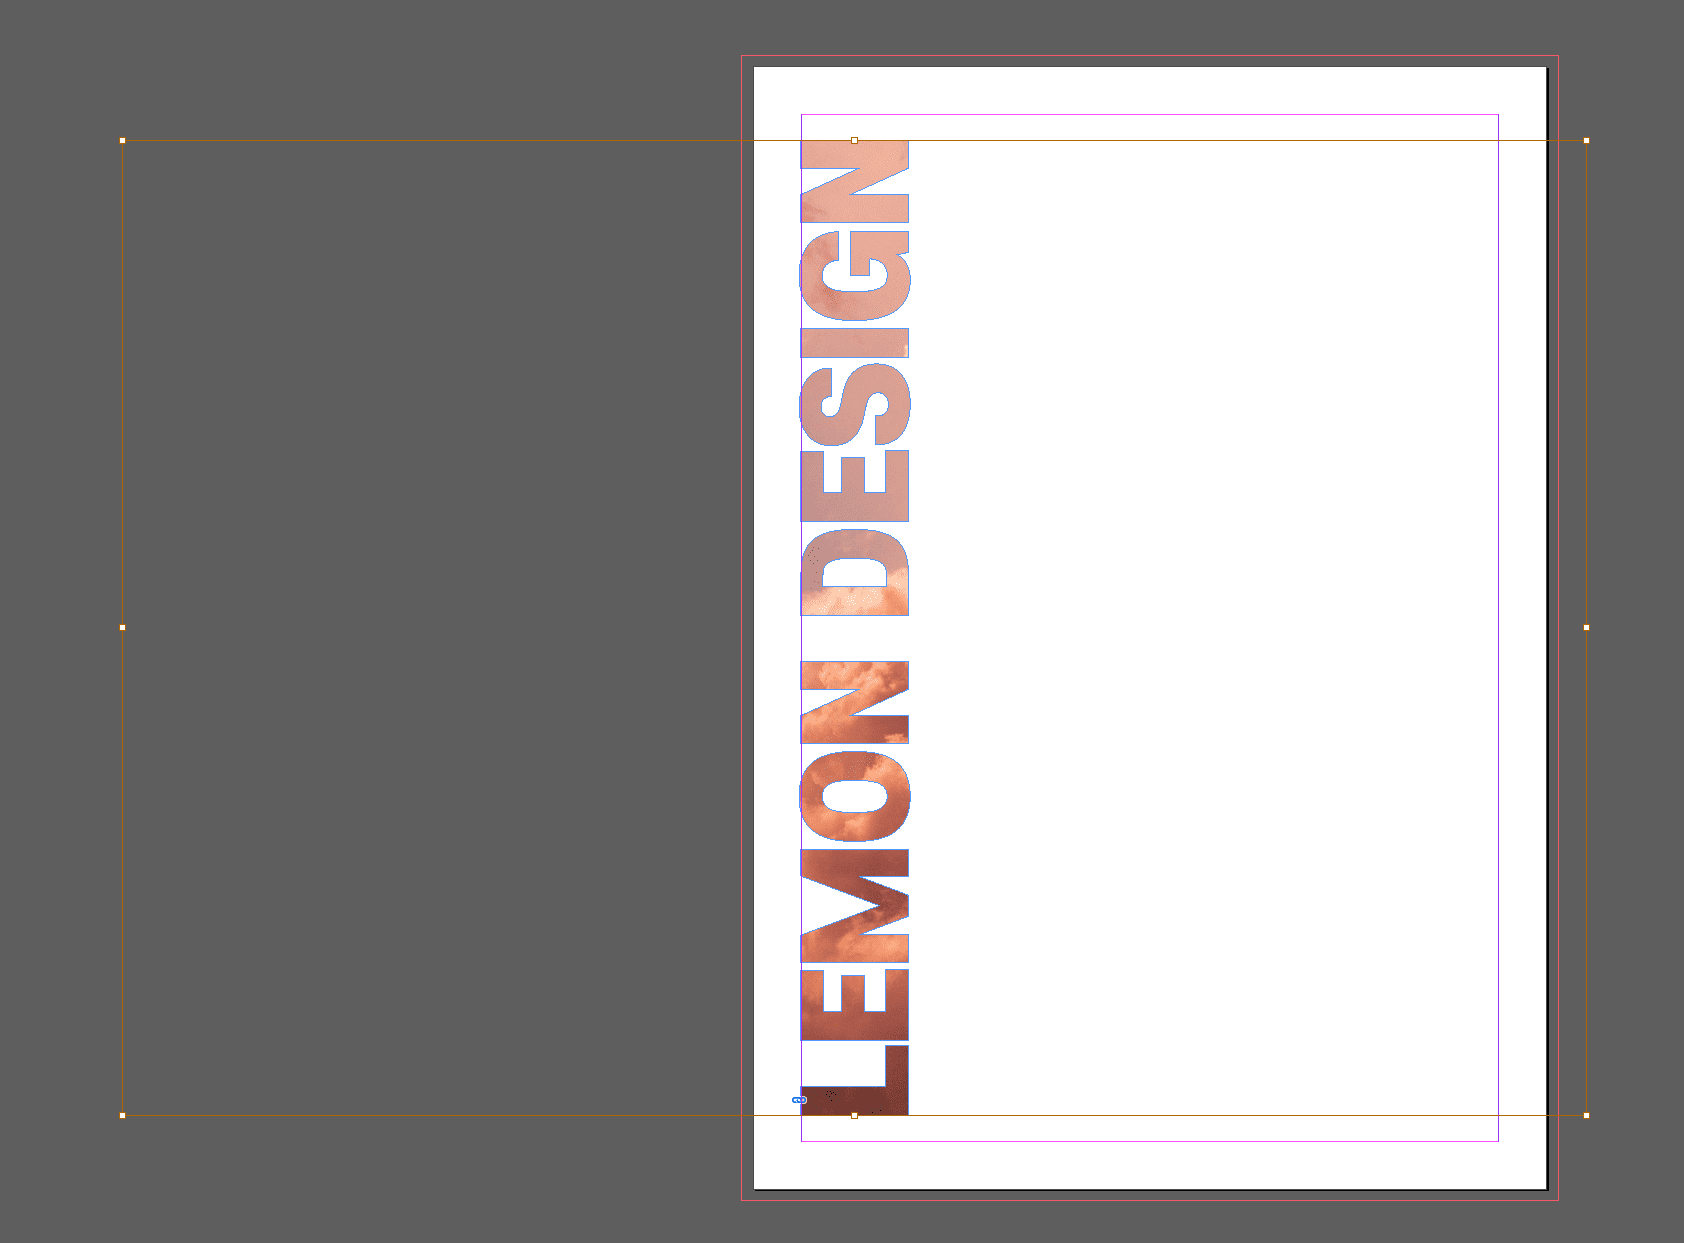 indesign-text-clipping-mask-modify-image